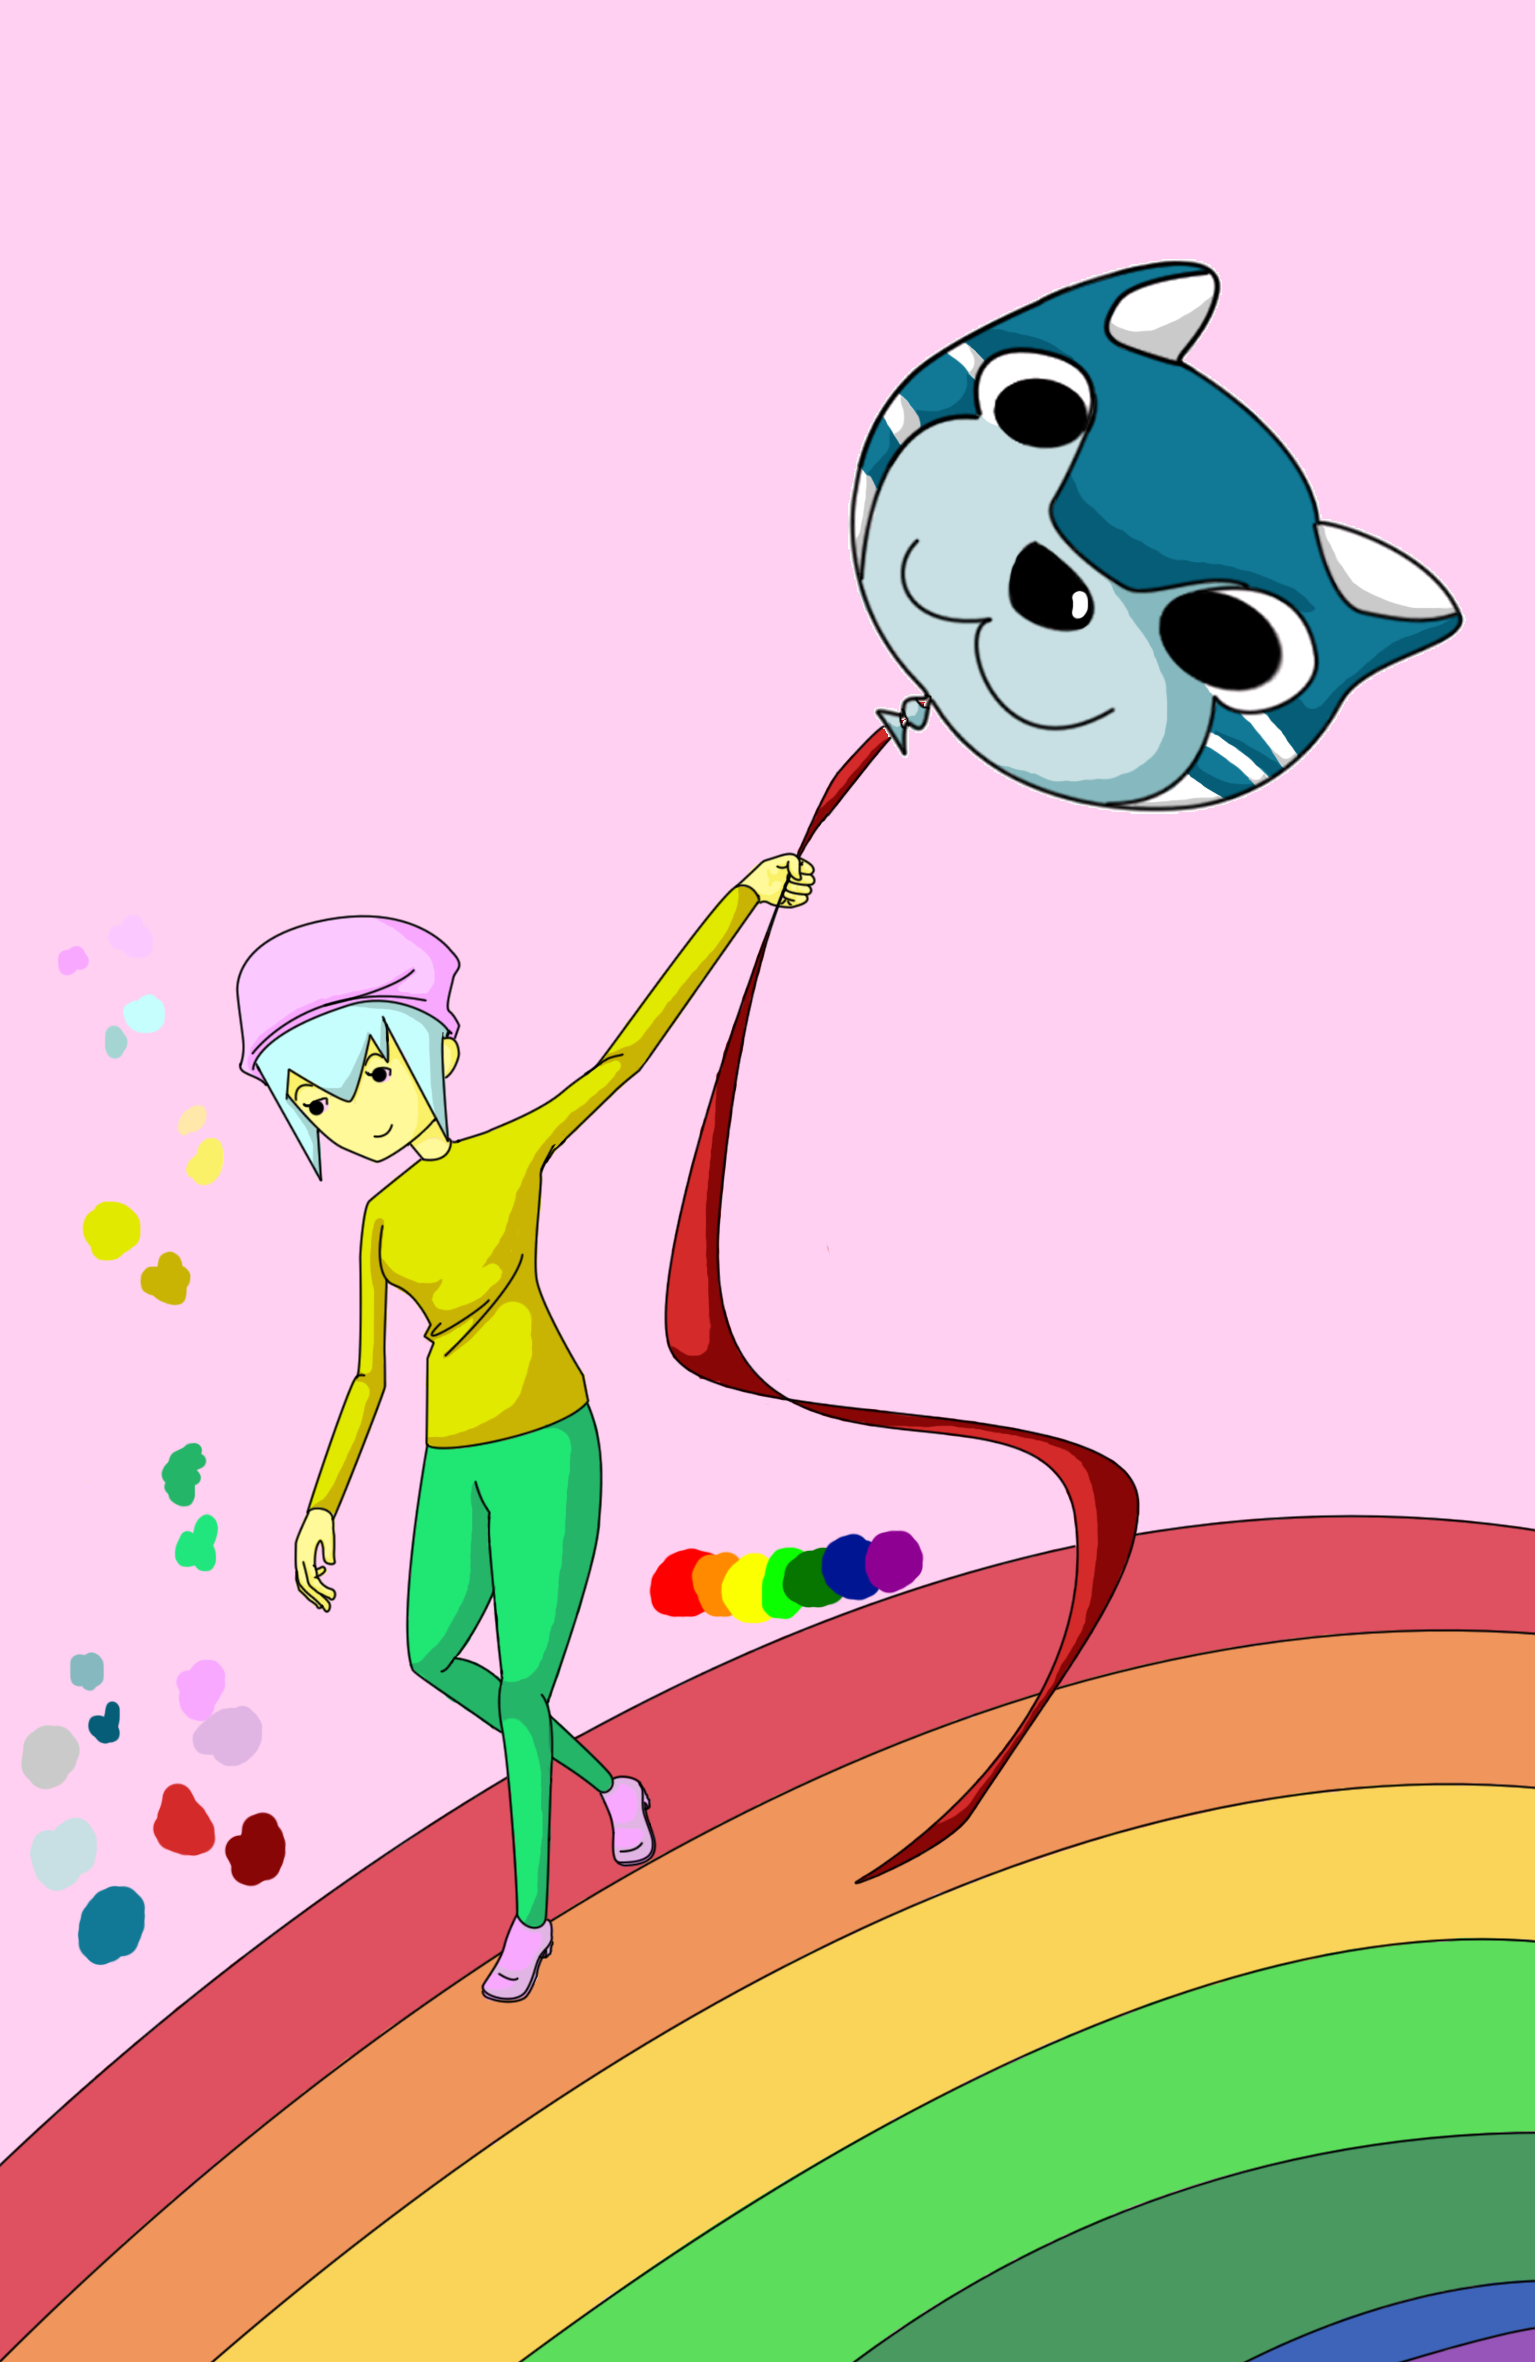 imaginary_raindow___color_v2_by_arufonso-d65lysl.png